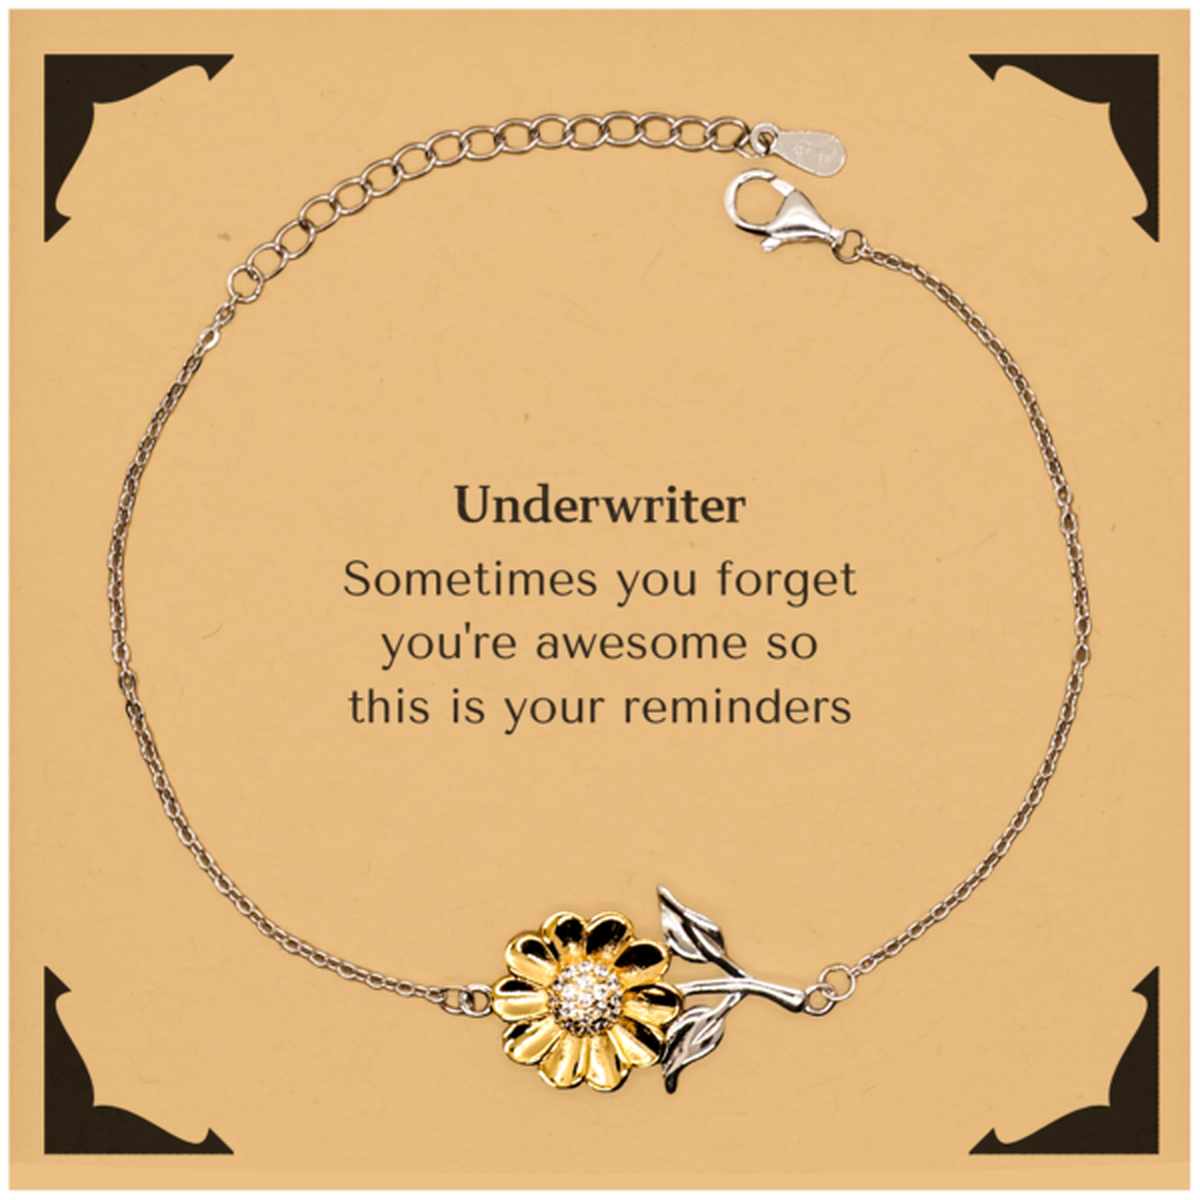 Sentimental Underwriter Sunflower Bracelet, Underwriter Sometimes you forget you're awesome so this is your reminders, Graduation Christmas Birthday Gifts for Underwriter, Men, Women, Coworkers